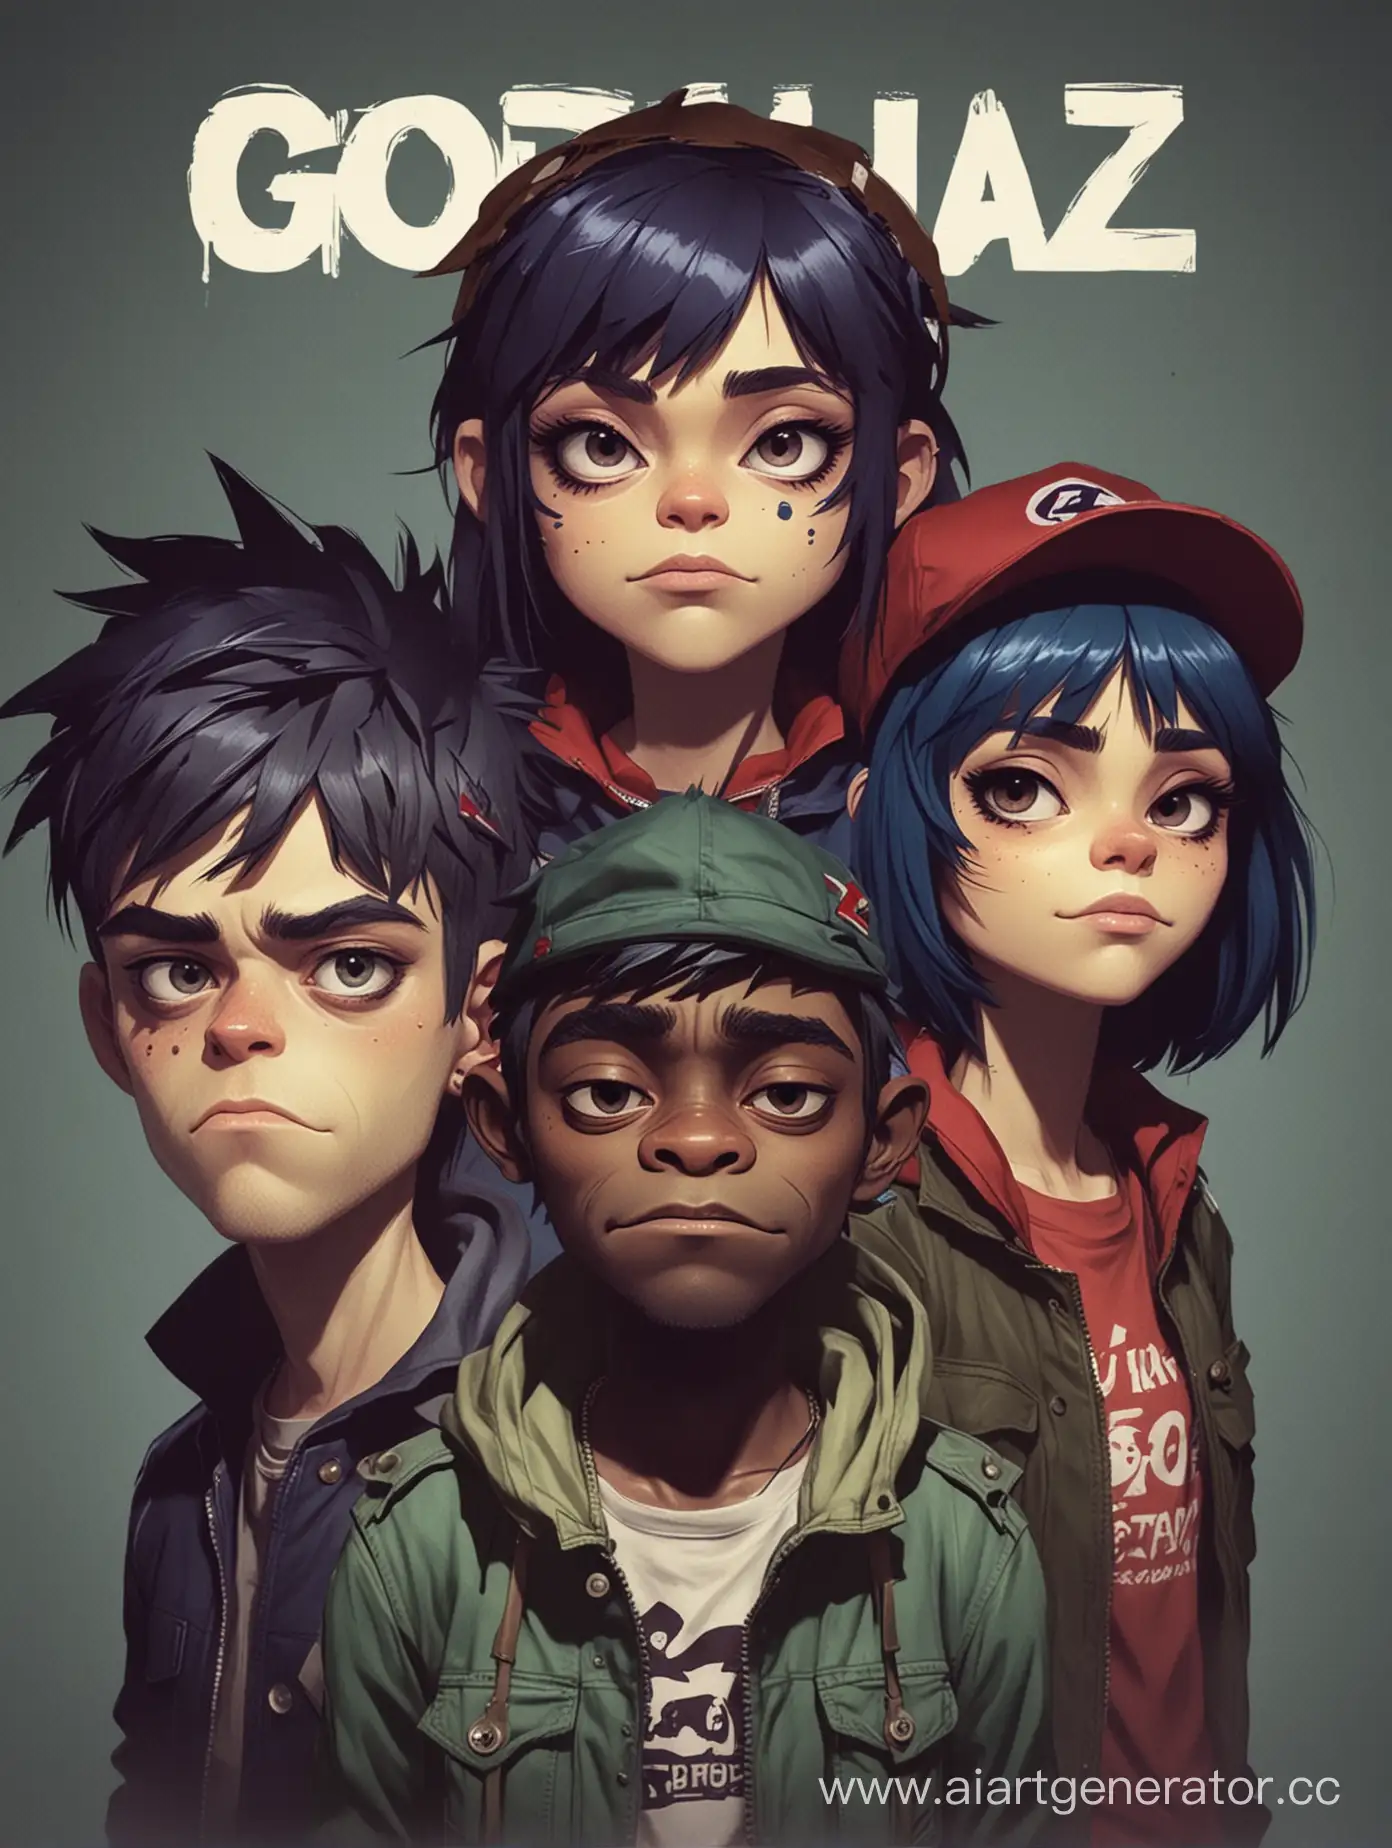 Animated-Band-Poster-in-Gorillaz-Style